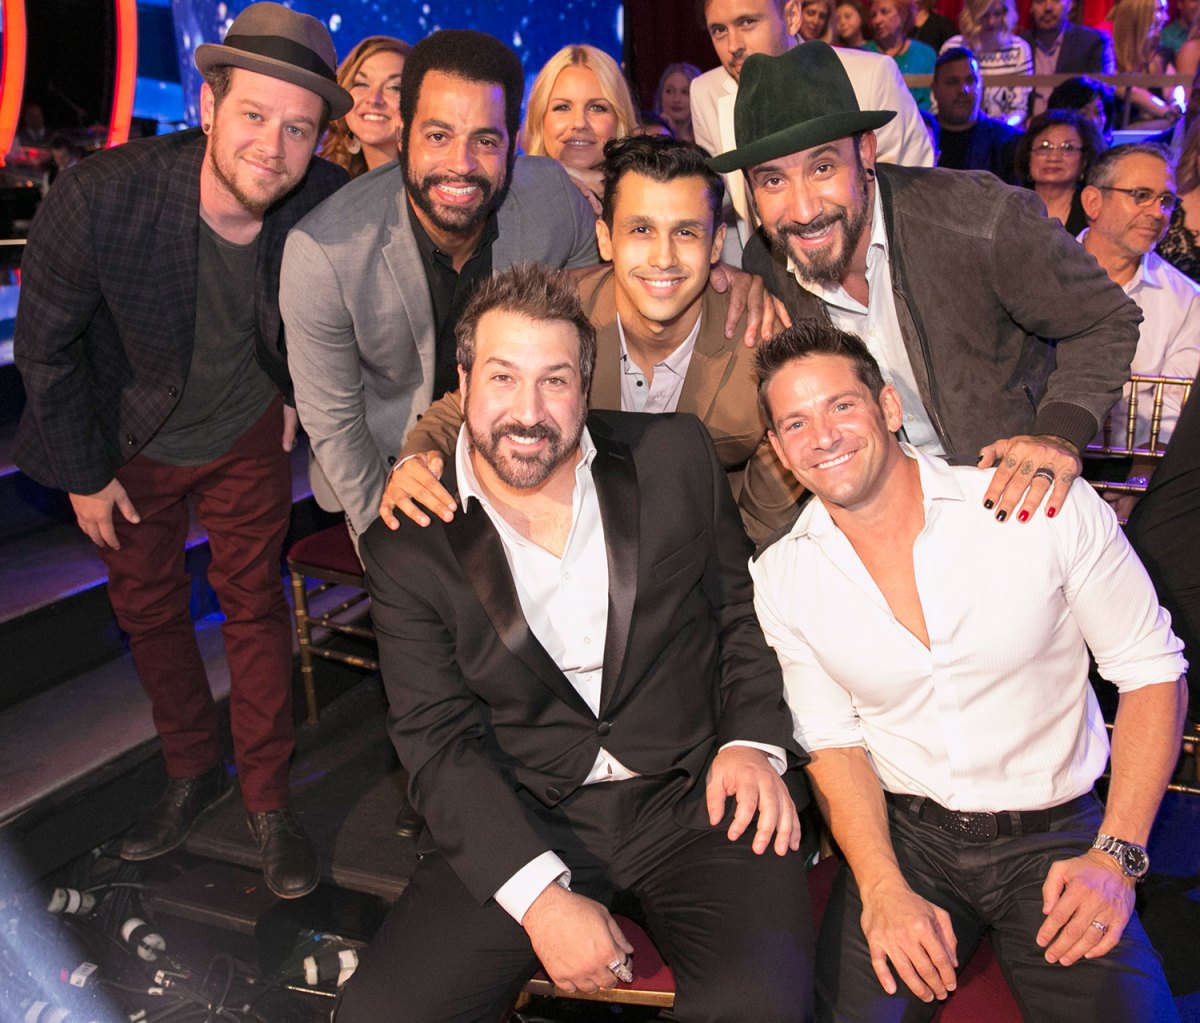 ‘NSync, Backstreet Boys Team Up for New Song ‘In the End’